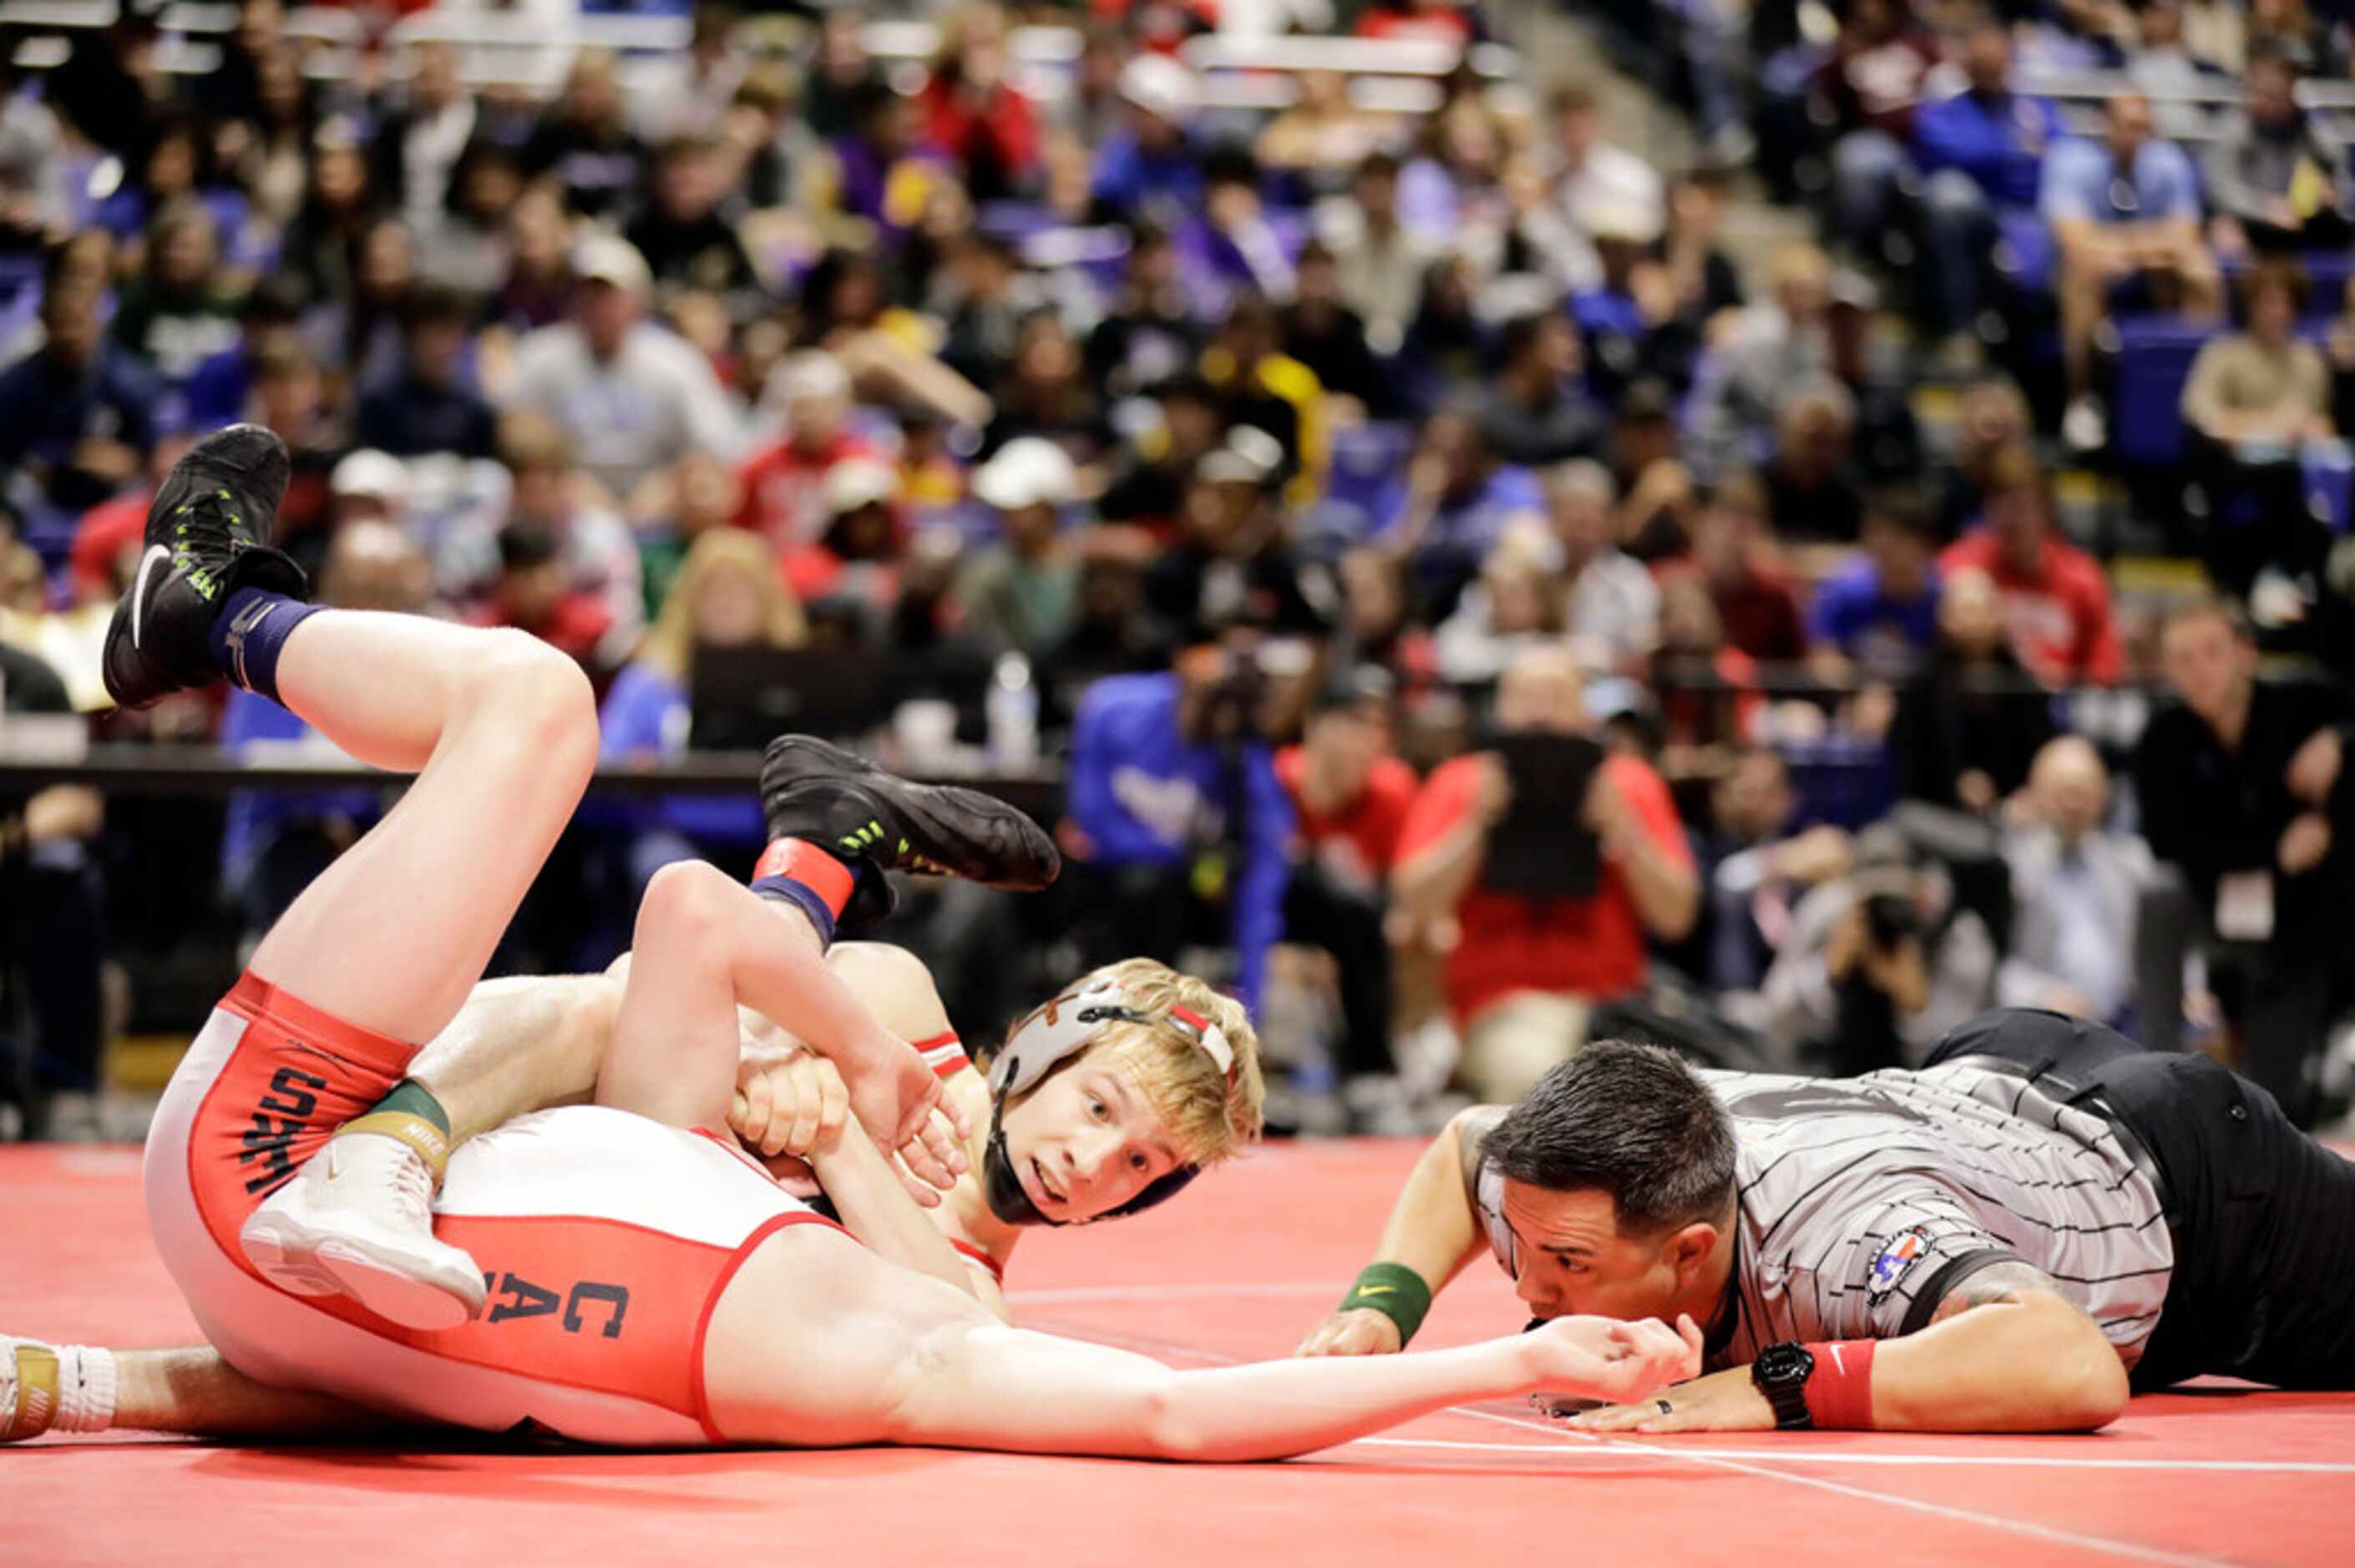 Braxton Brown of Allen wrestles during the UIL Texas State Wrestling Championships,...